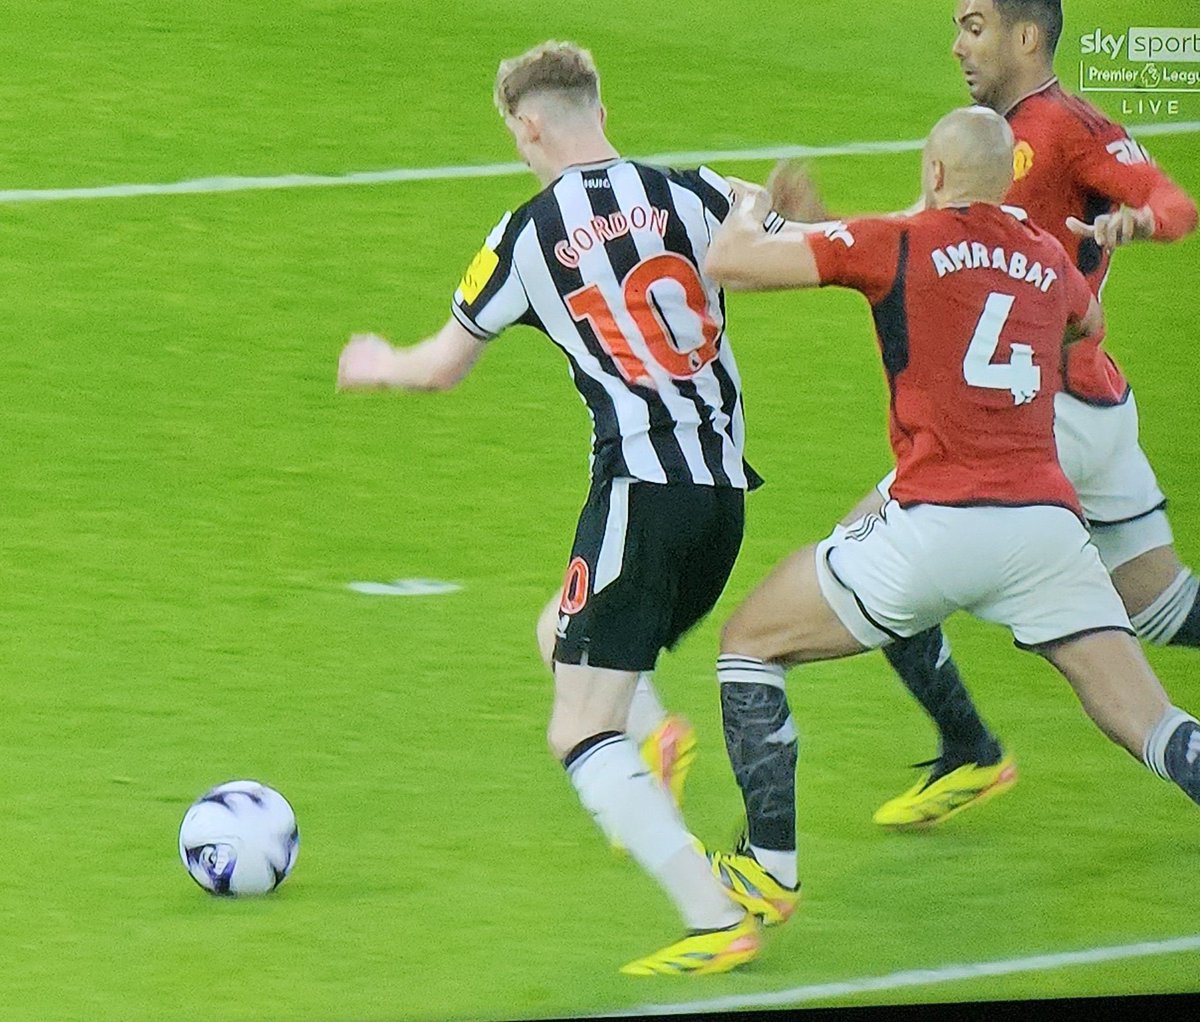 VAR exists to subtly manipulate, I won't hear any other theory because if you are breathing you know this is a foul.